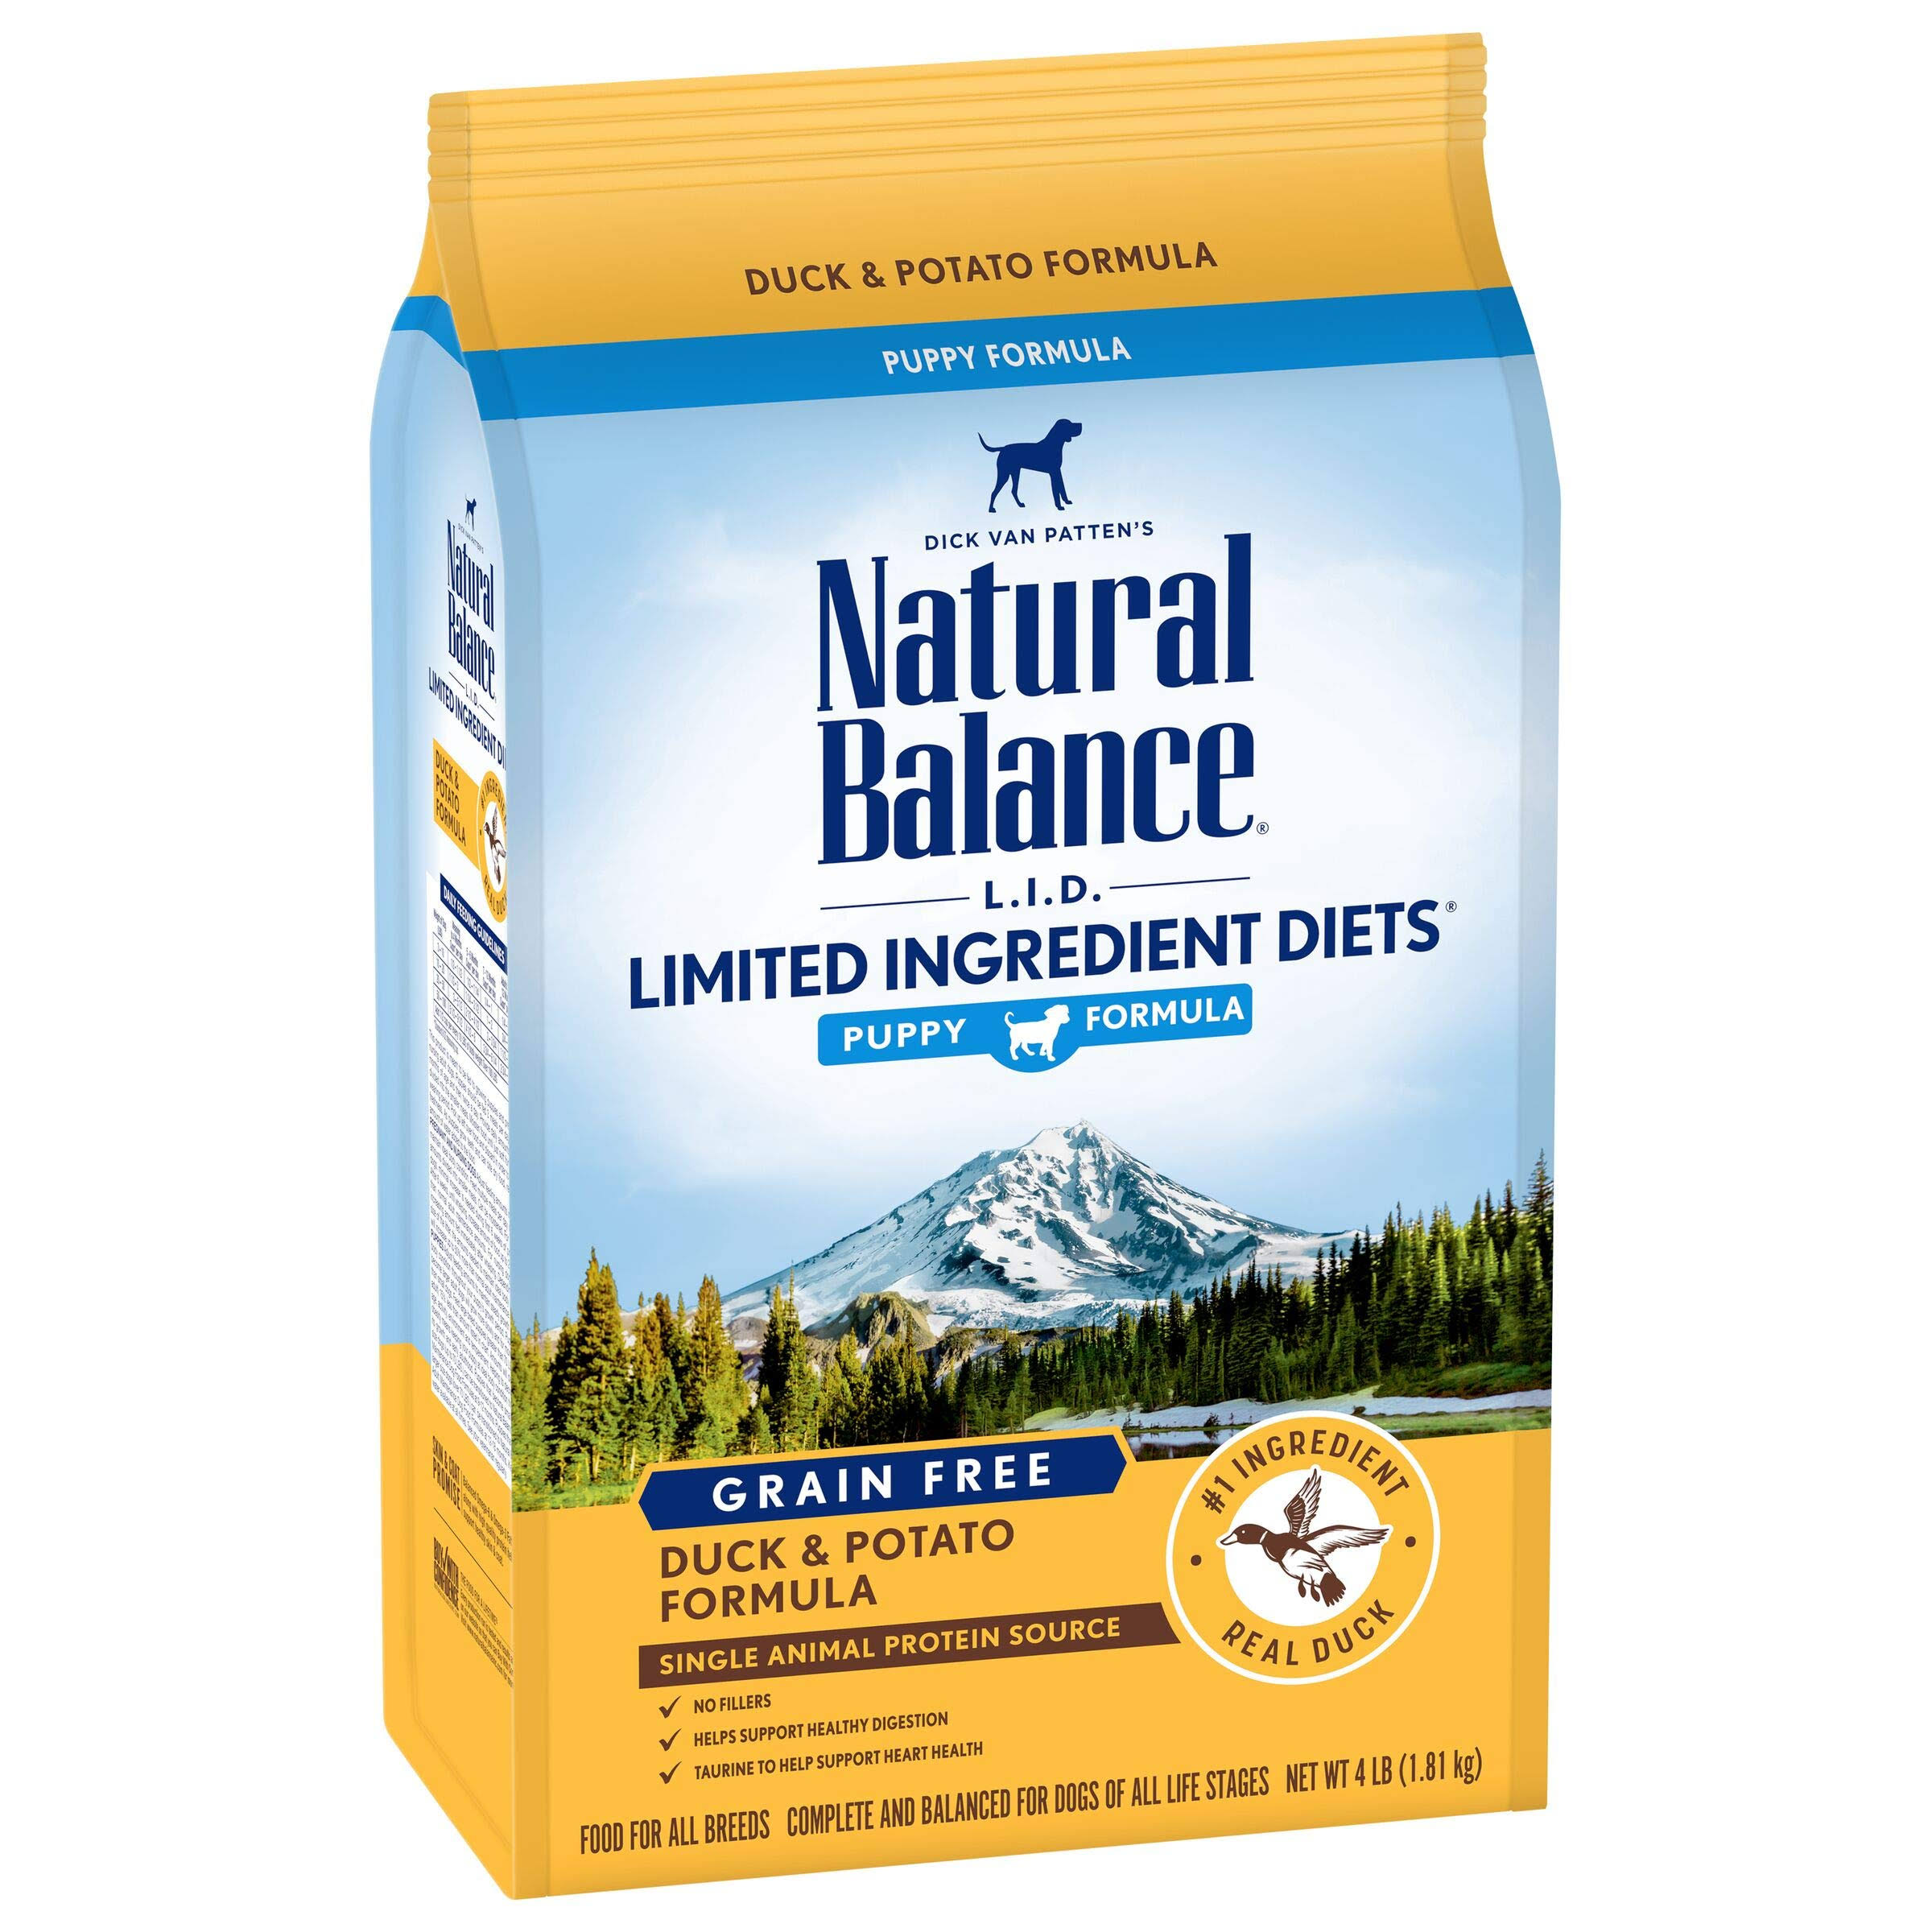 Natural Balance Limited Ingredient Diets Puppy Food - Duck and Potato | PetSmart